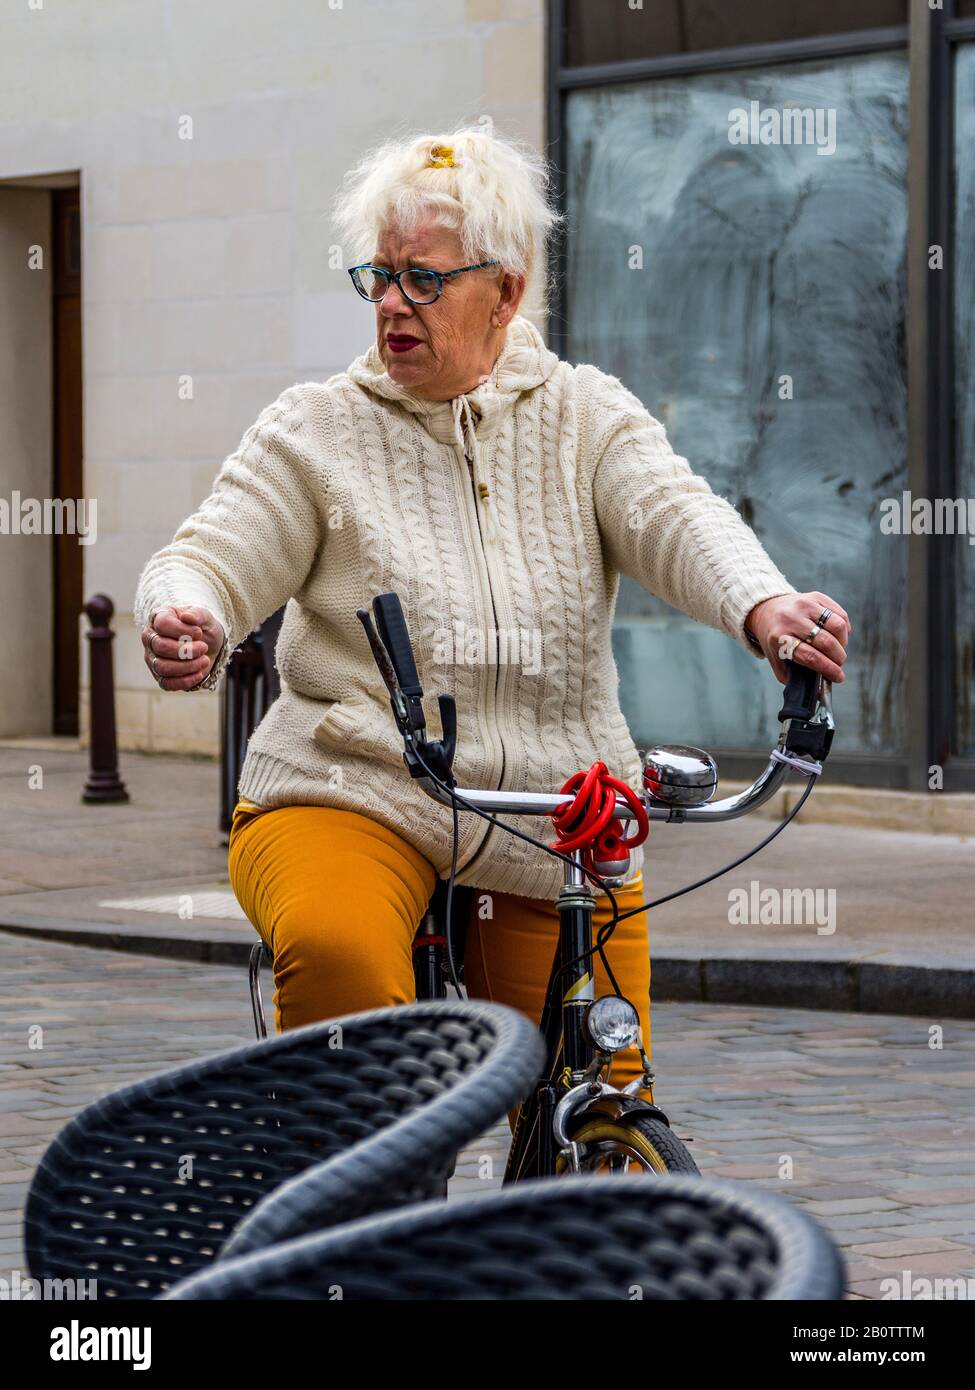 Middle aged woman on bicycle. Stock Photo